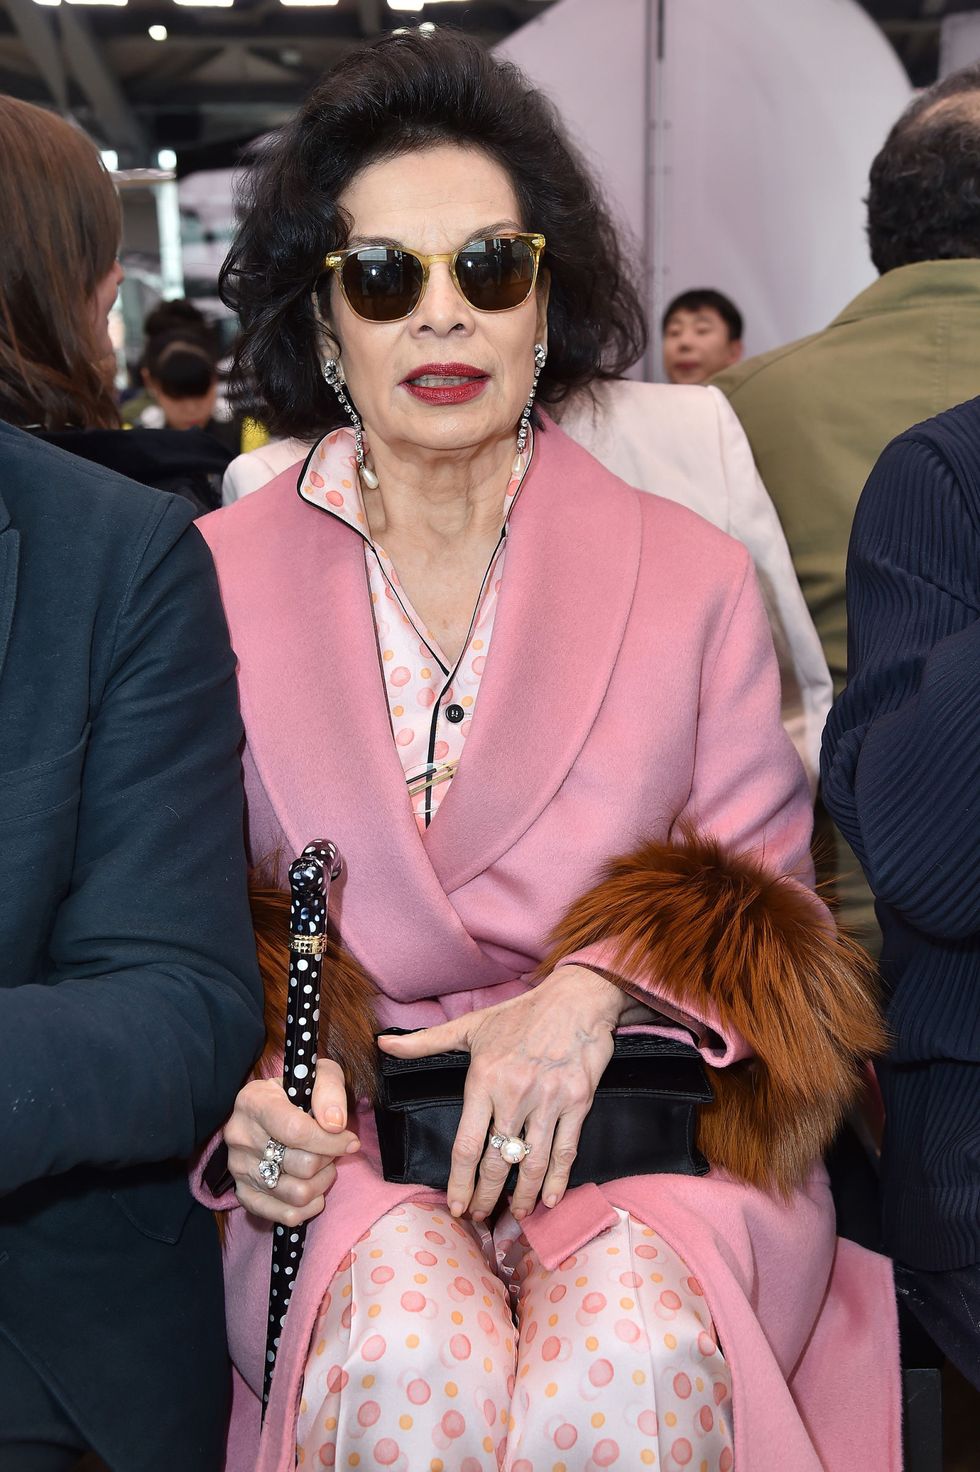 MILAN, ITALY - MAY 07:  Bianca Jagger (in Prada) while attending the Prada Resort 2018 Womenswear Show in Osservatorio on May 7, 2017 in Milan, Italy.  (Photo by Jacopo Raule/Getty Images for Prada)